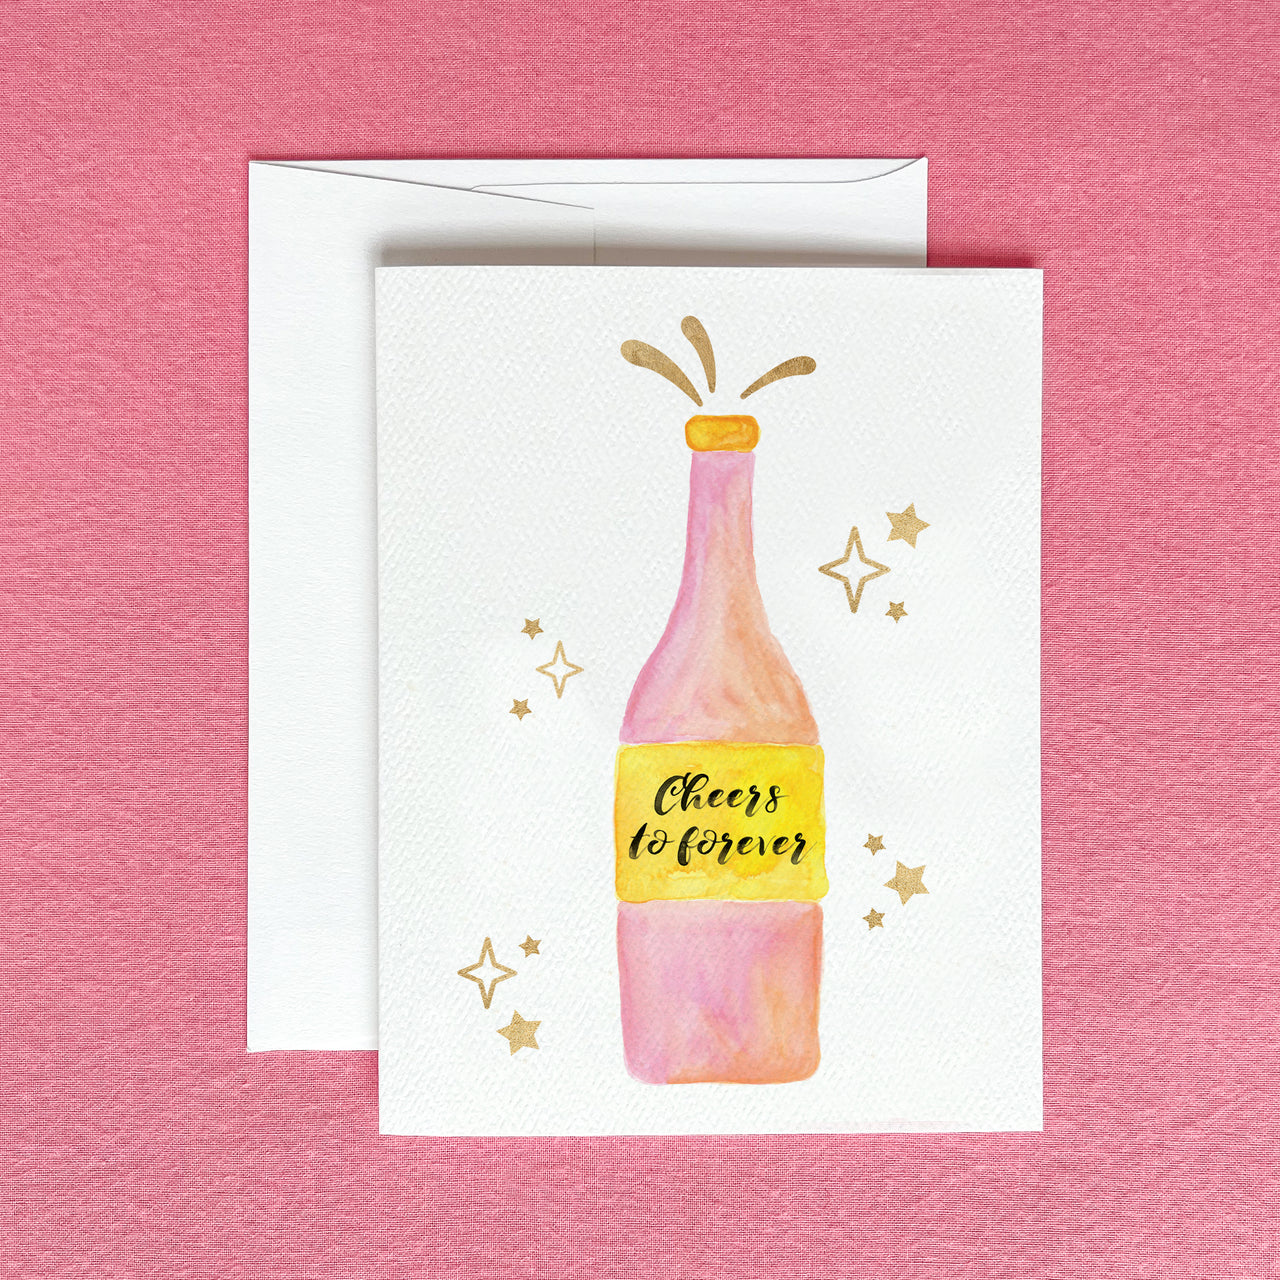 "Cheers to Forever" Champagne Greeting Card